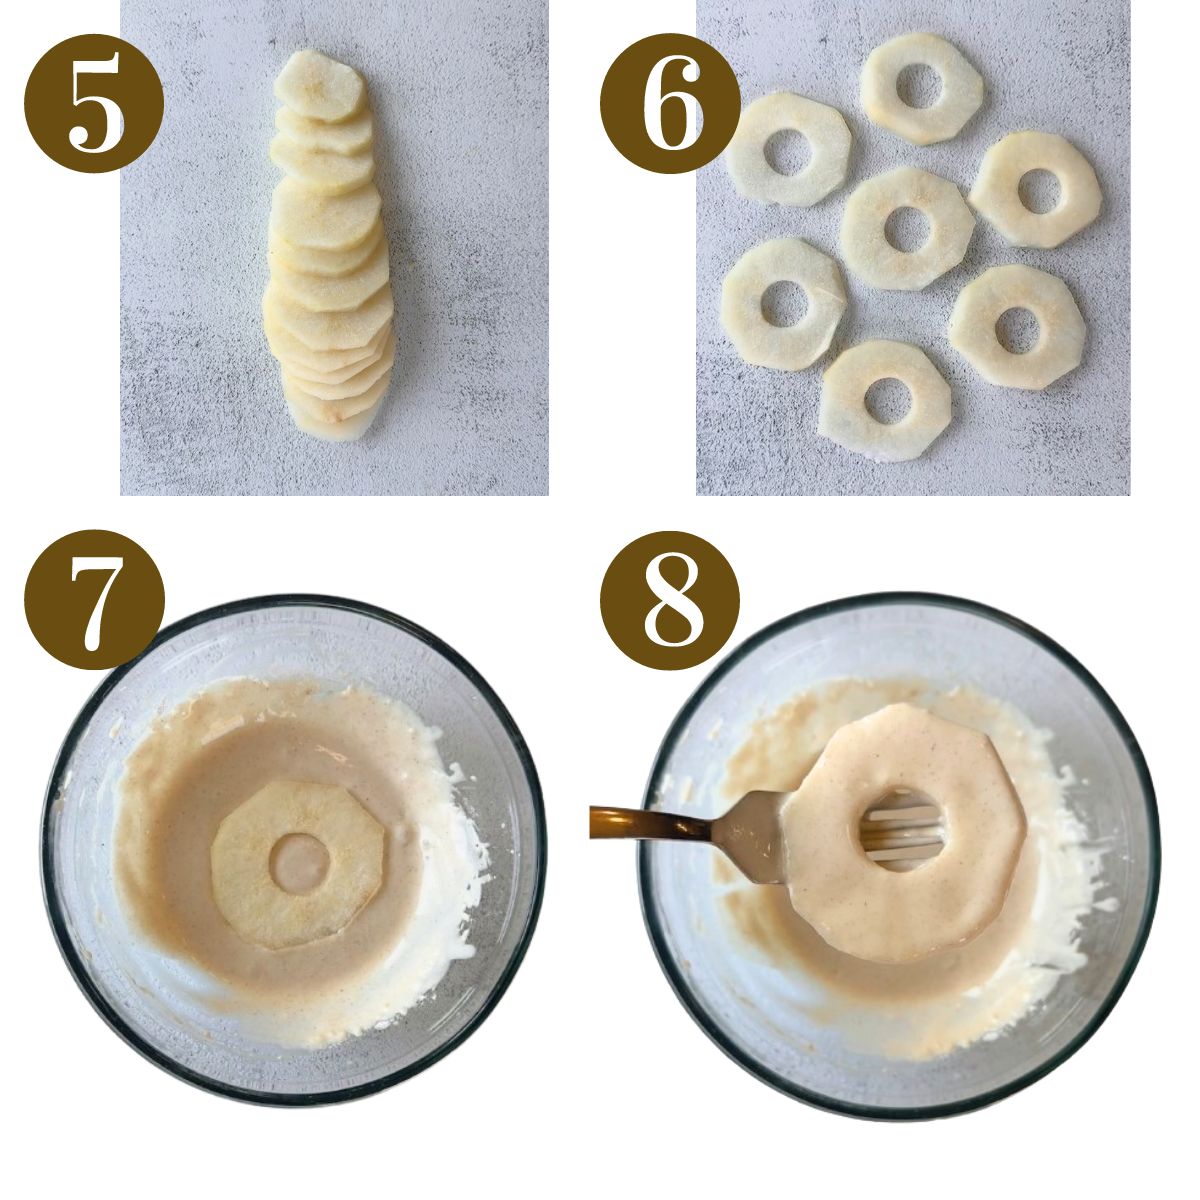 Steps to make dipped pancakes with pears.